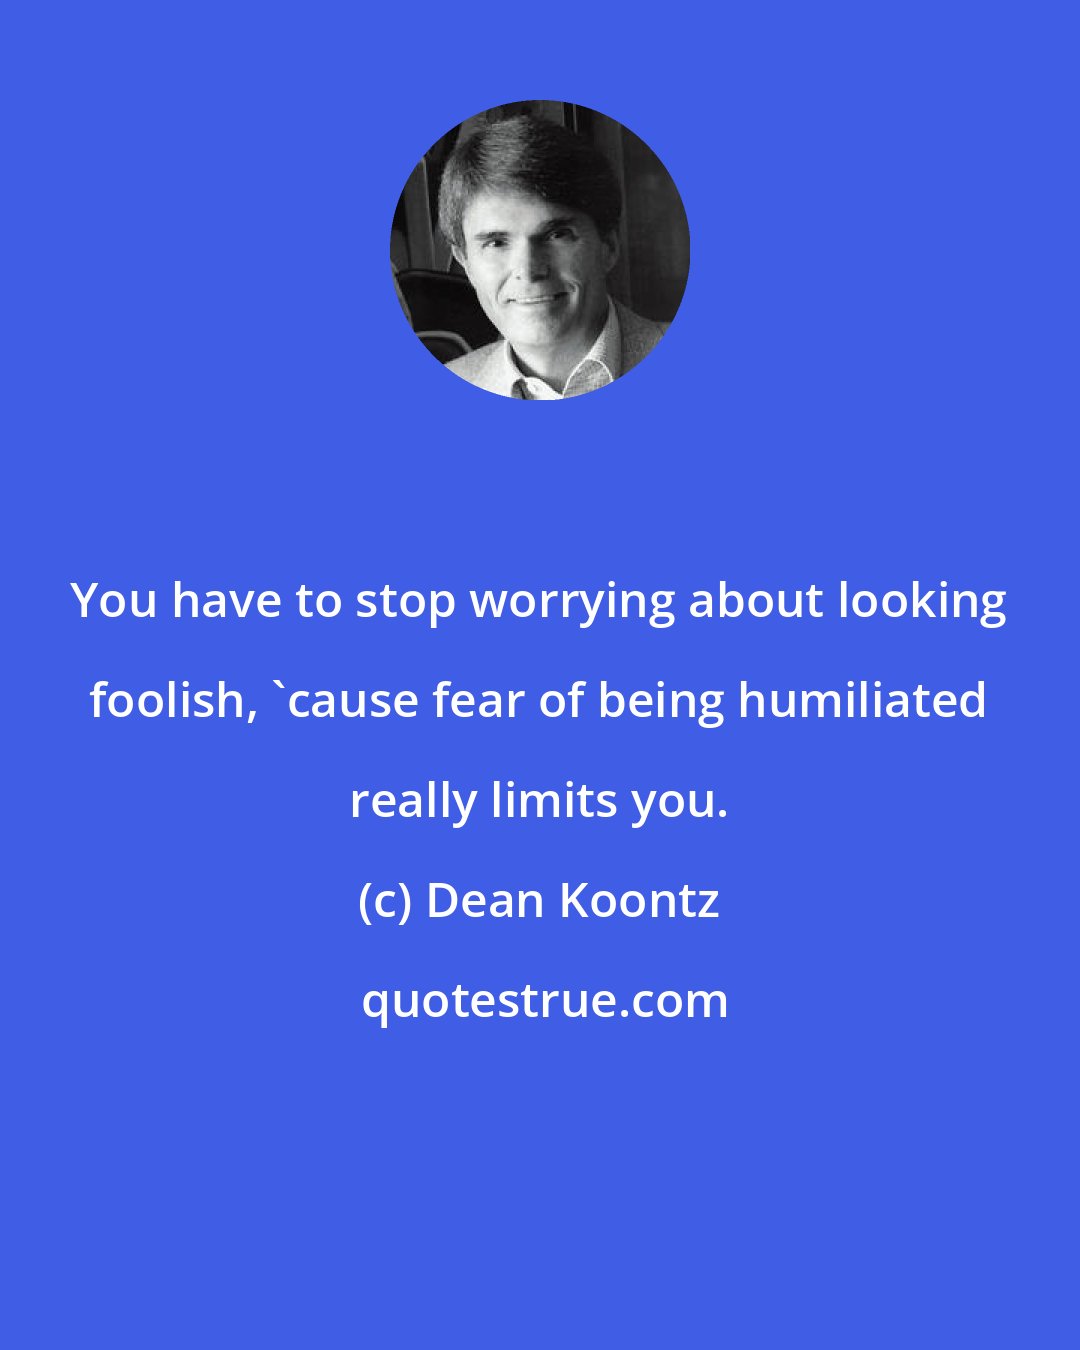 Dean Koontz: You have to stop worrying about looking foolish, 'cause fear of being humiliated really limits you.